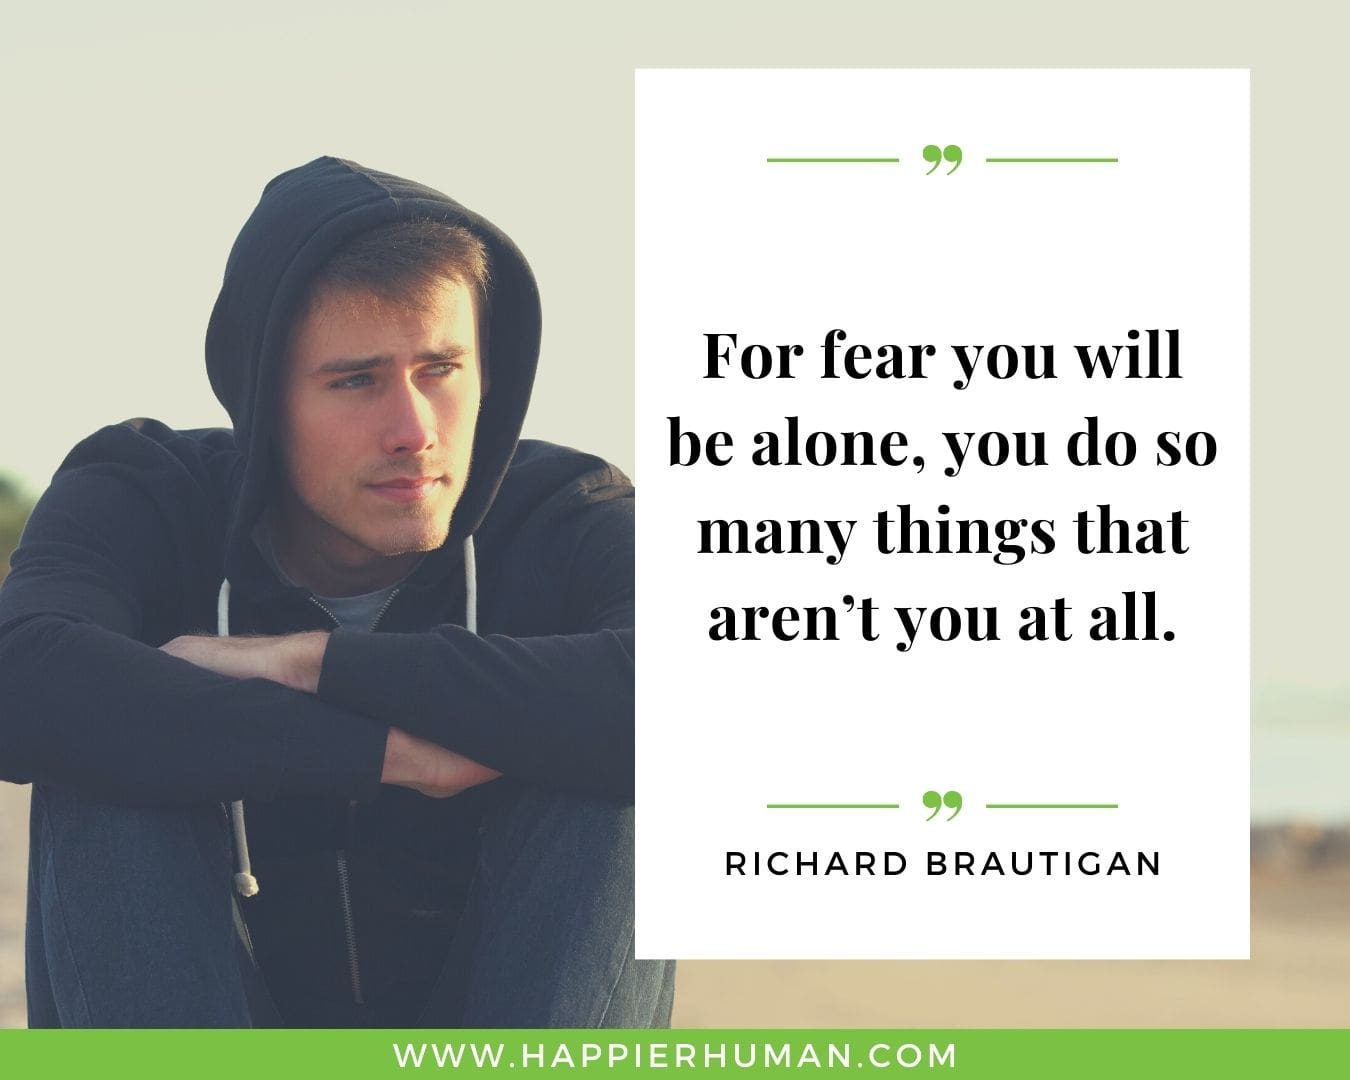 Loneliness Quotes - “For fear you will be alone, you do so many things that aren’t you at all.” - Richard Brautigan